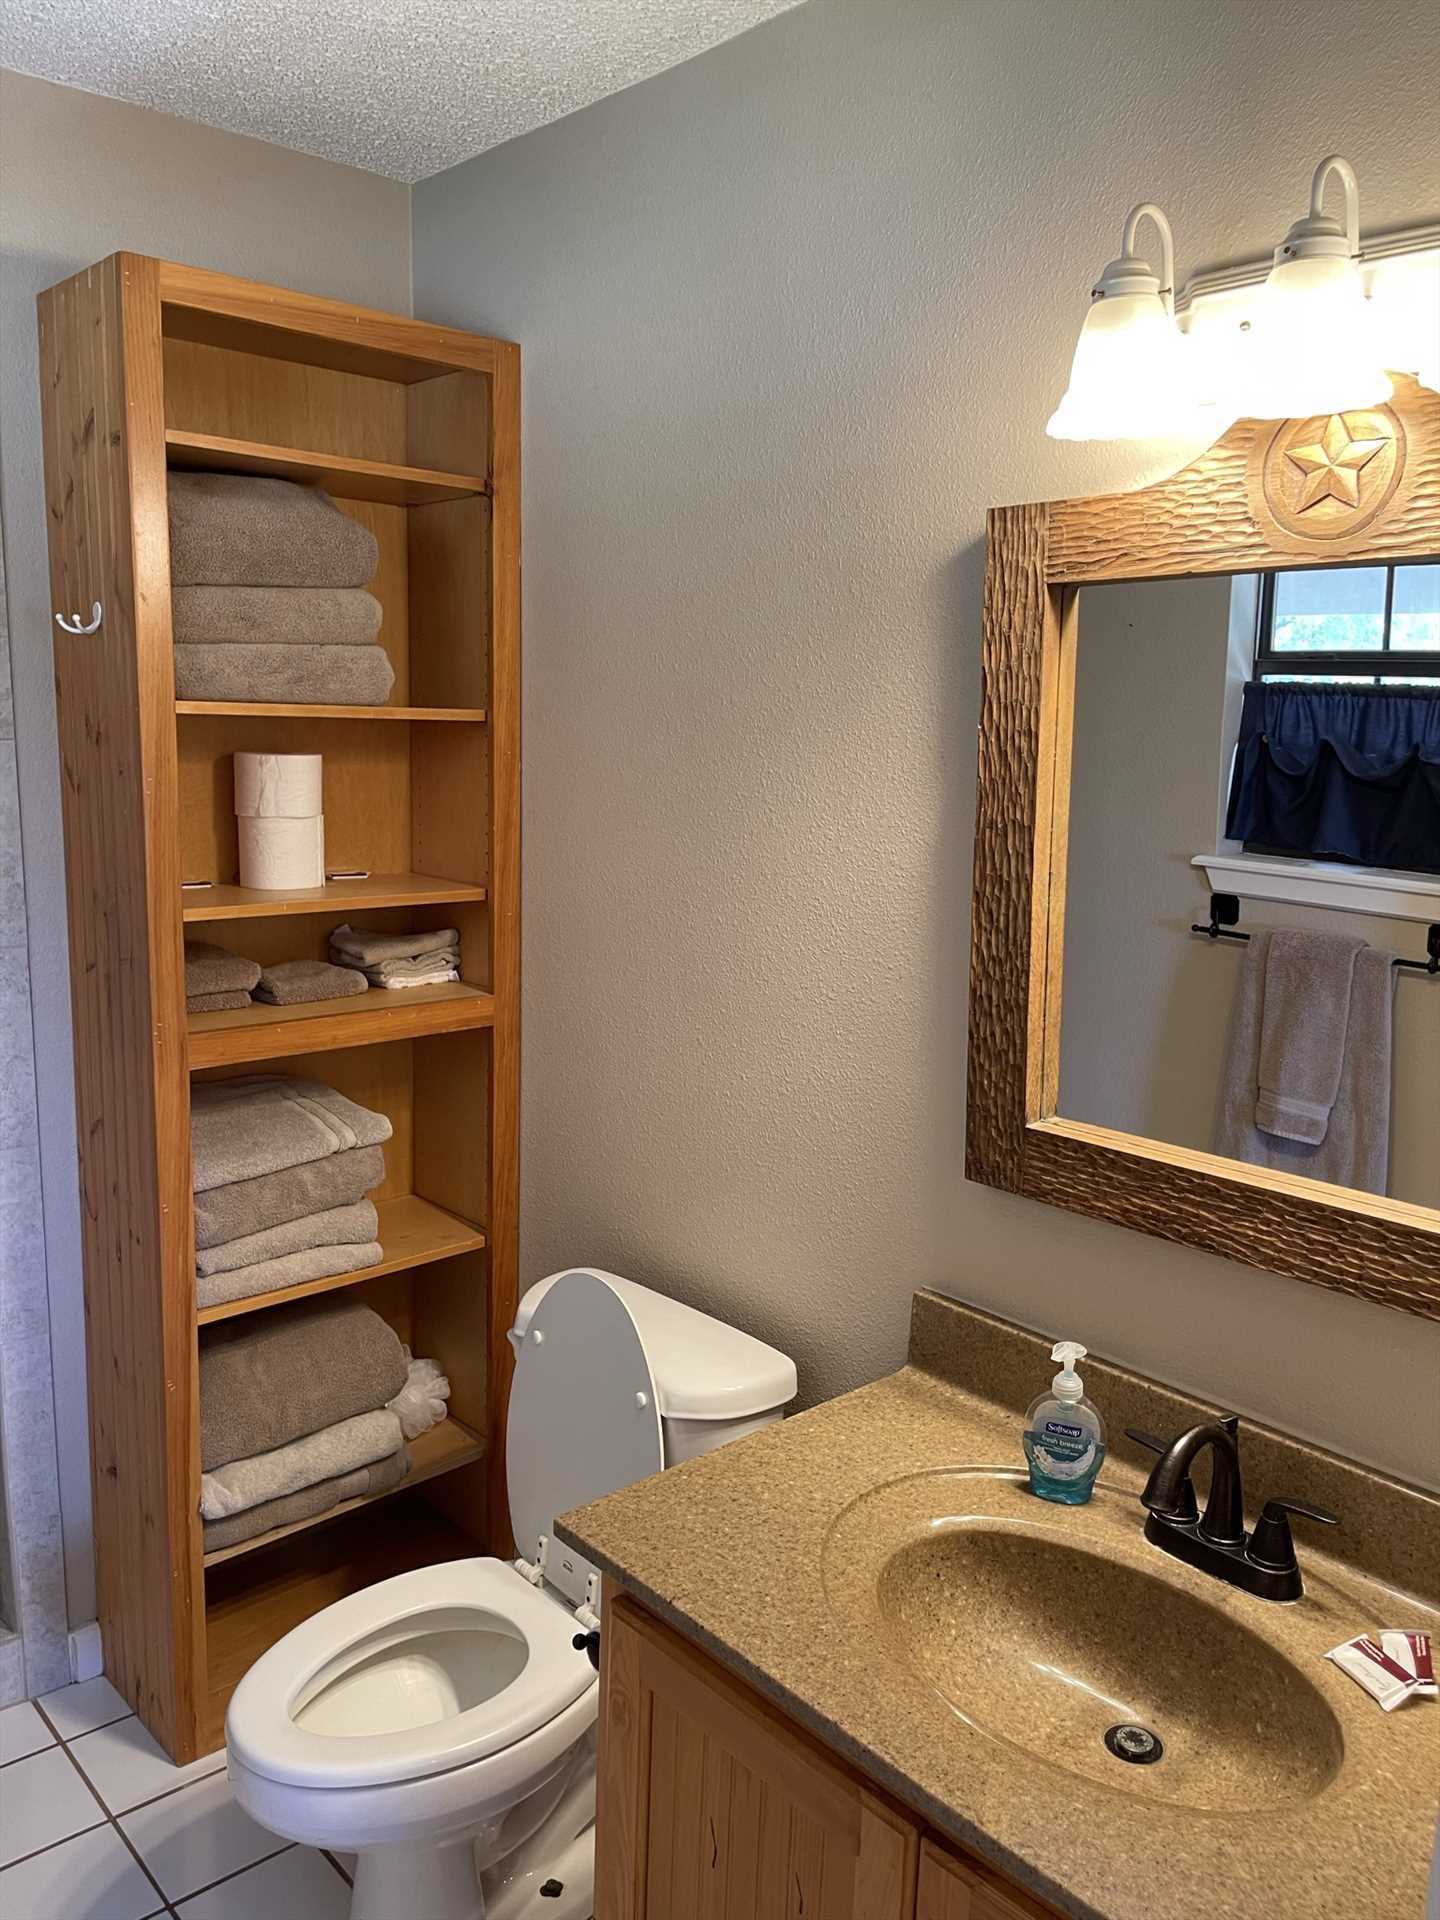                                                 There's a nice, big mirrored vanity in the master bath, too! Plenty of clean bathroom linens are included.